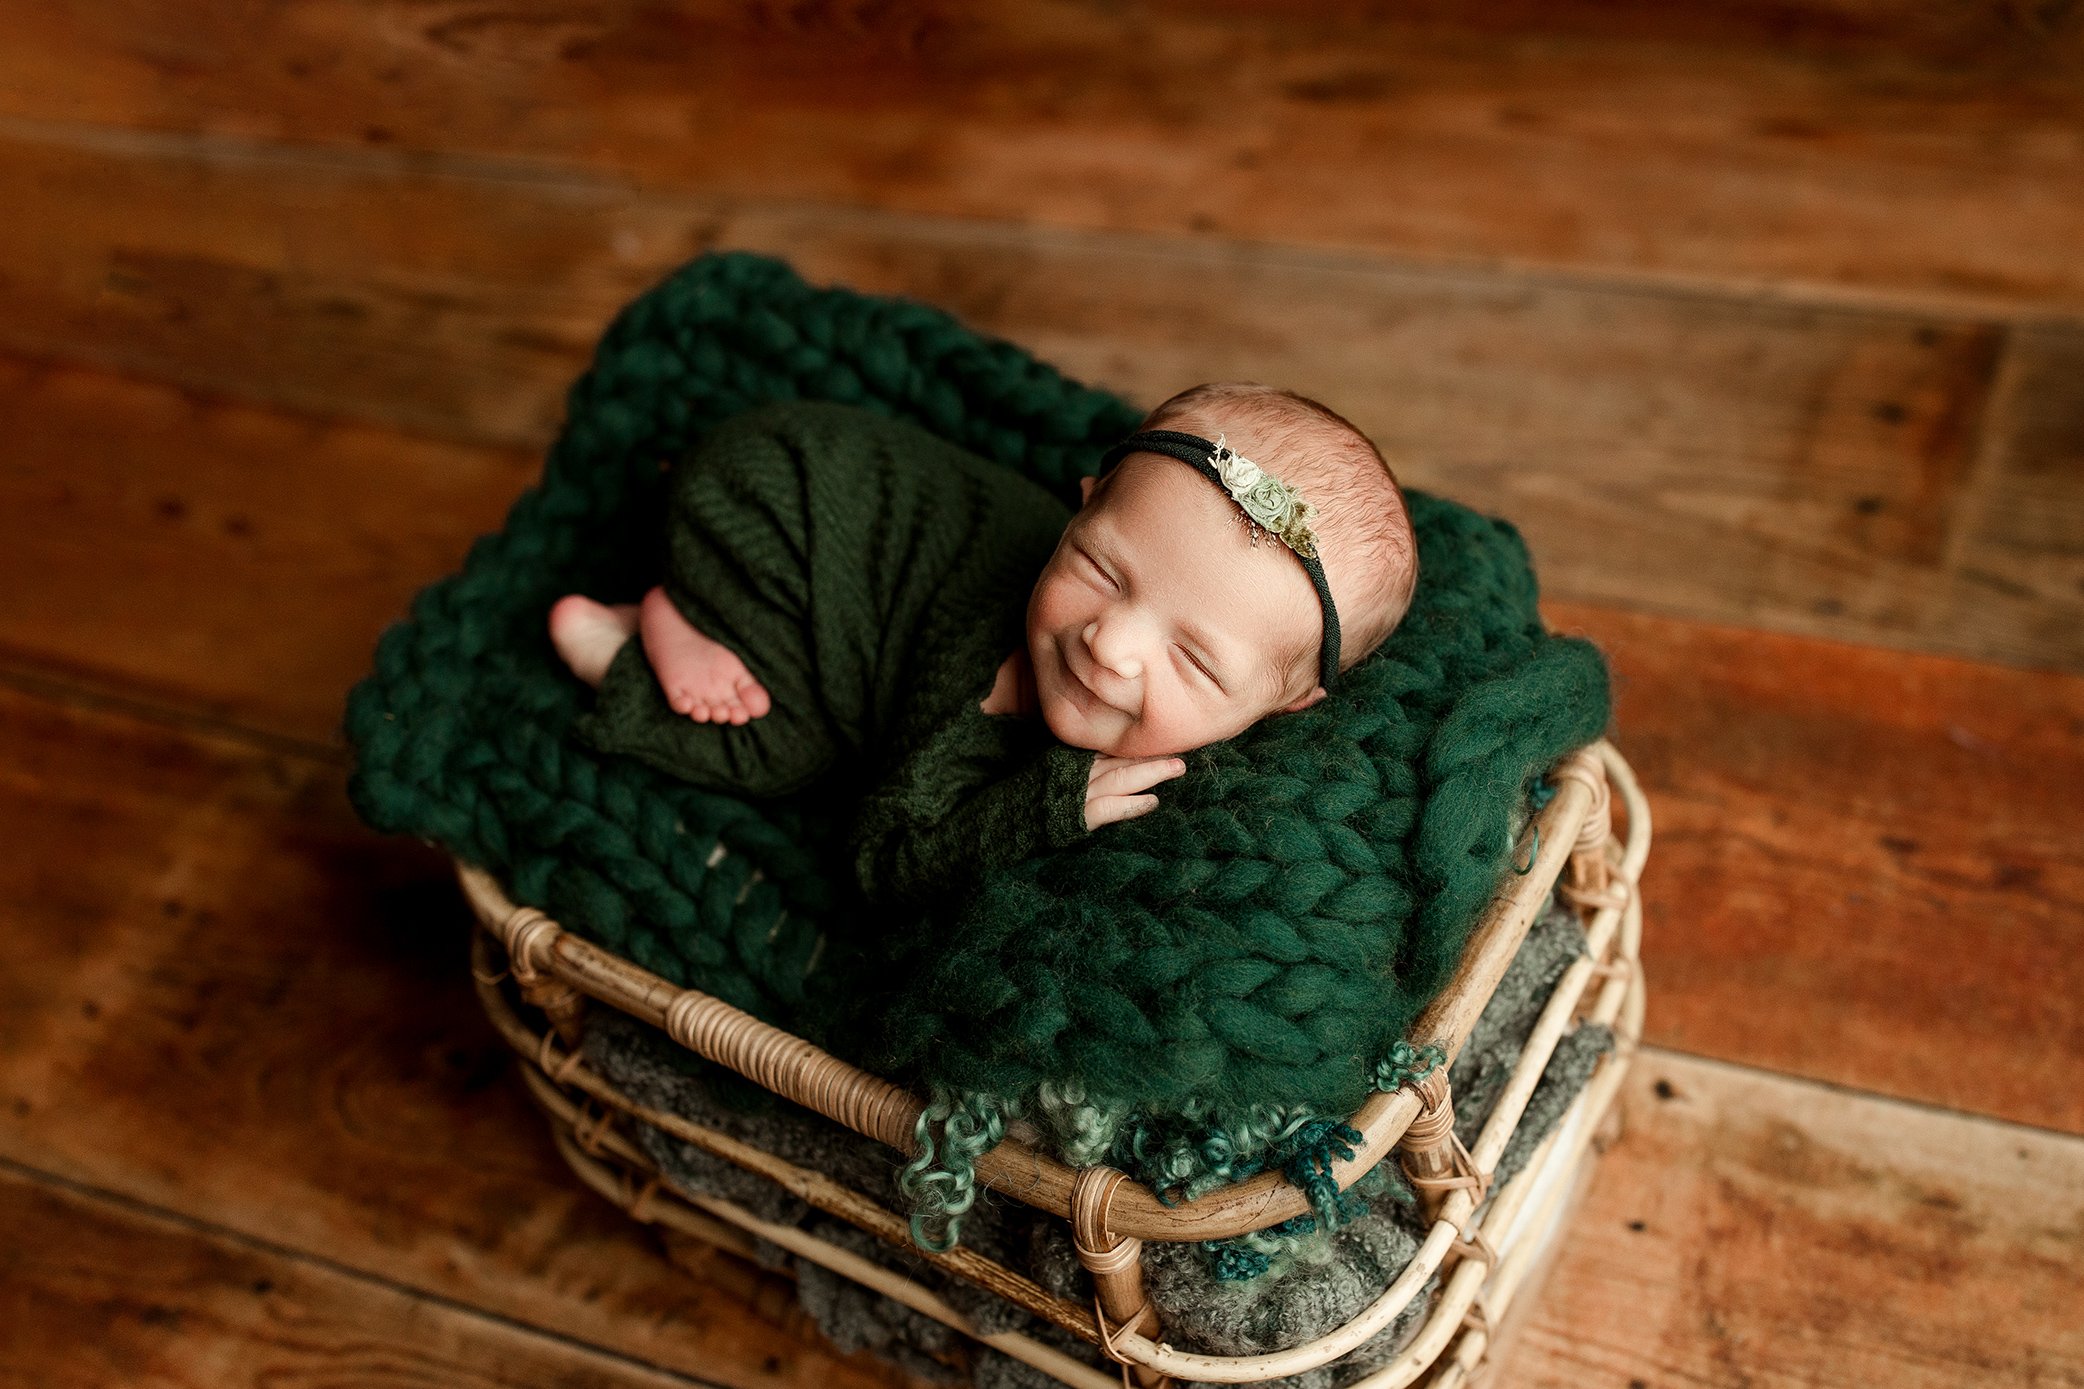 Newborn baby girl smiling in green outfit